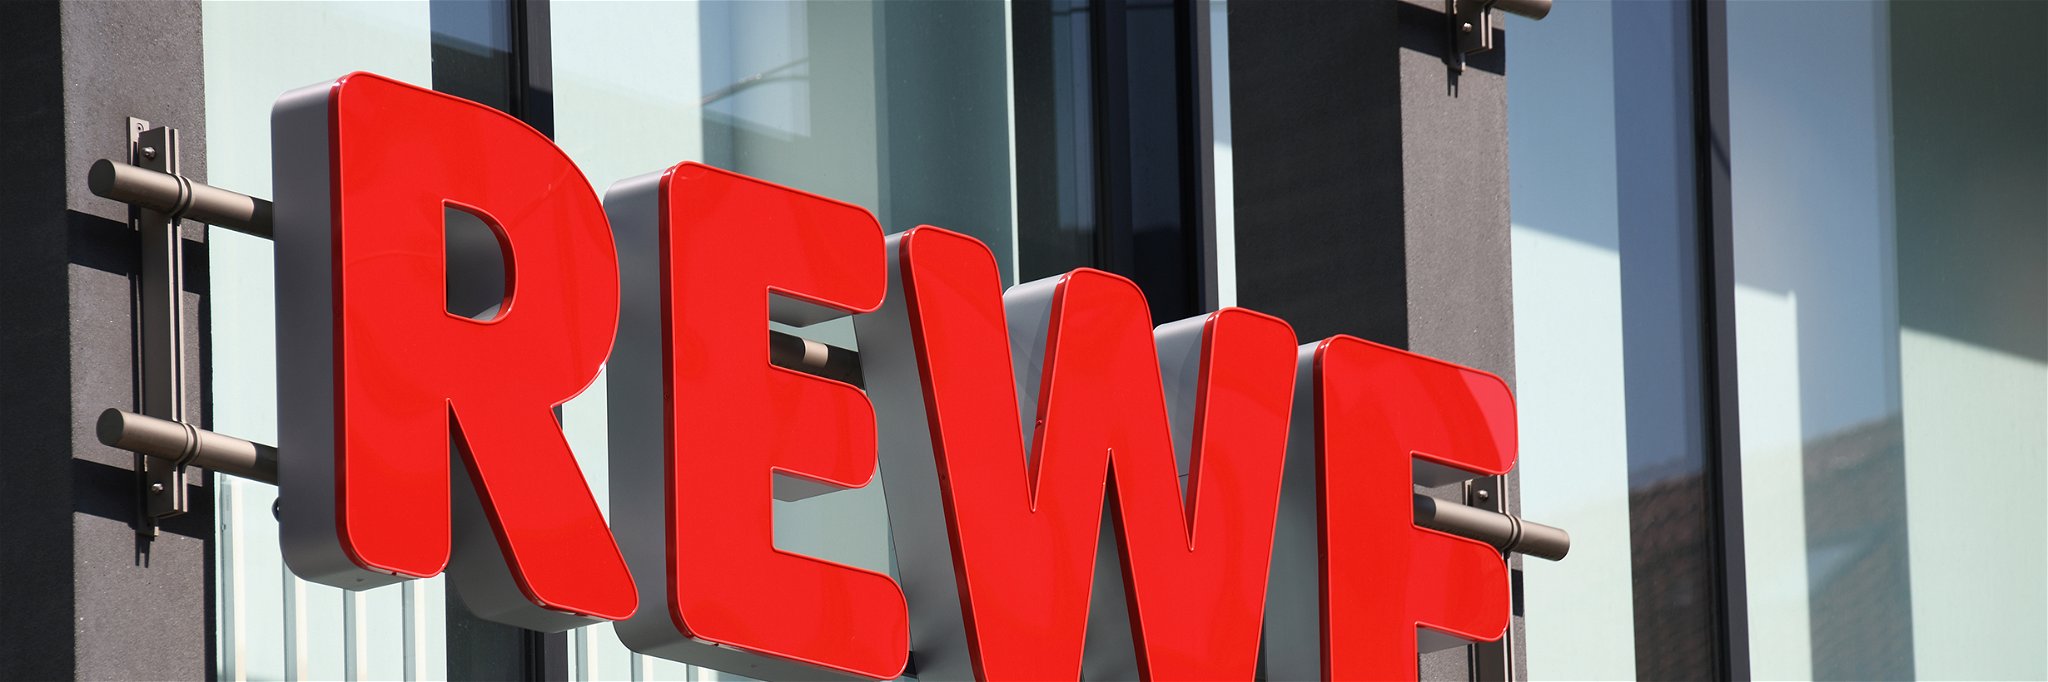 Retail group Rewe has suspended its partnership agreement with the DFB.